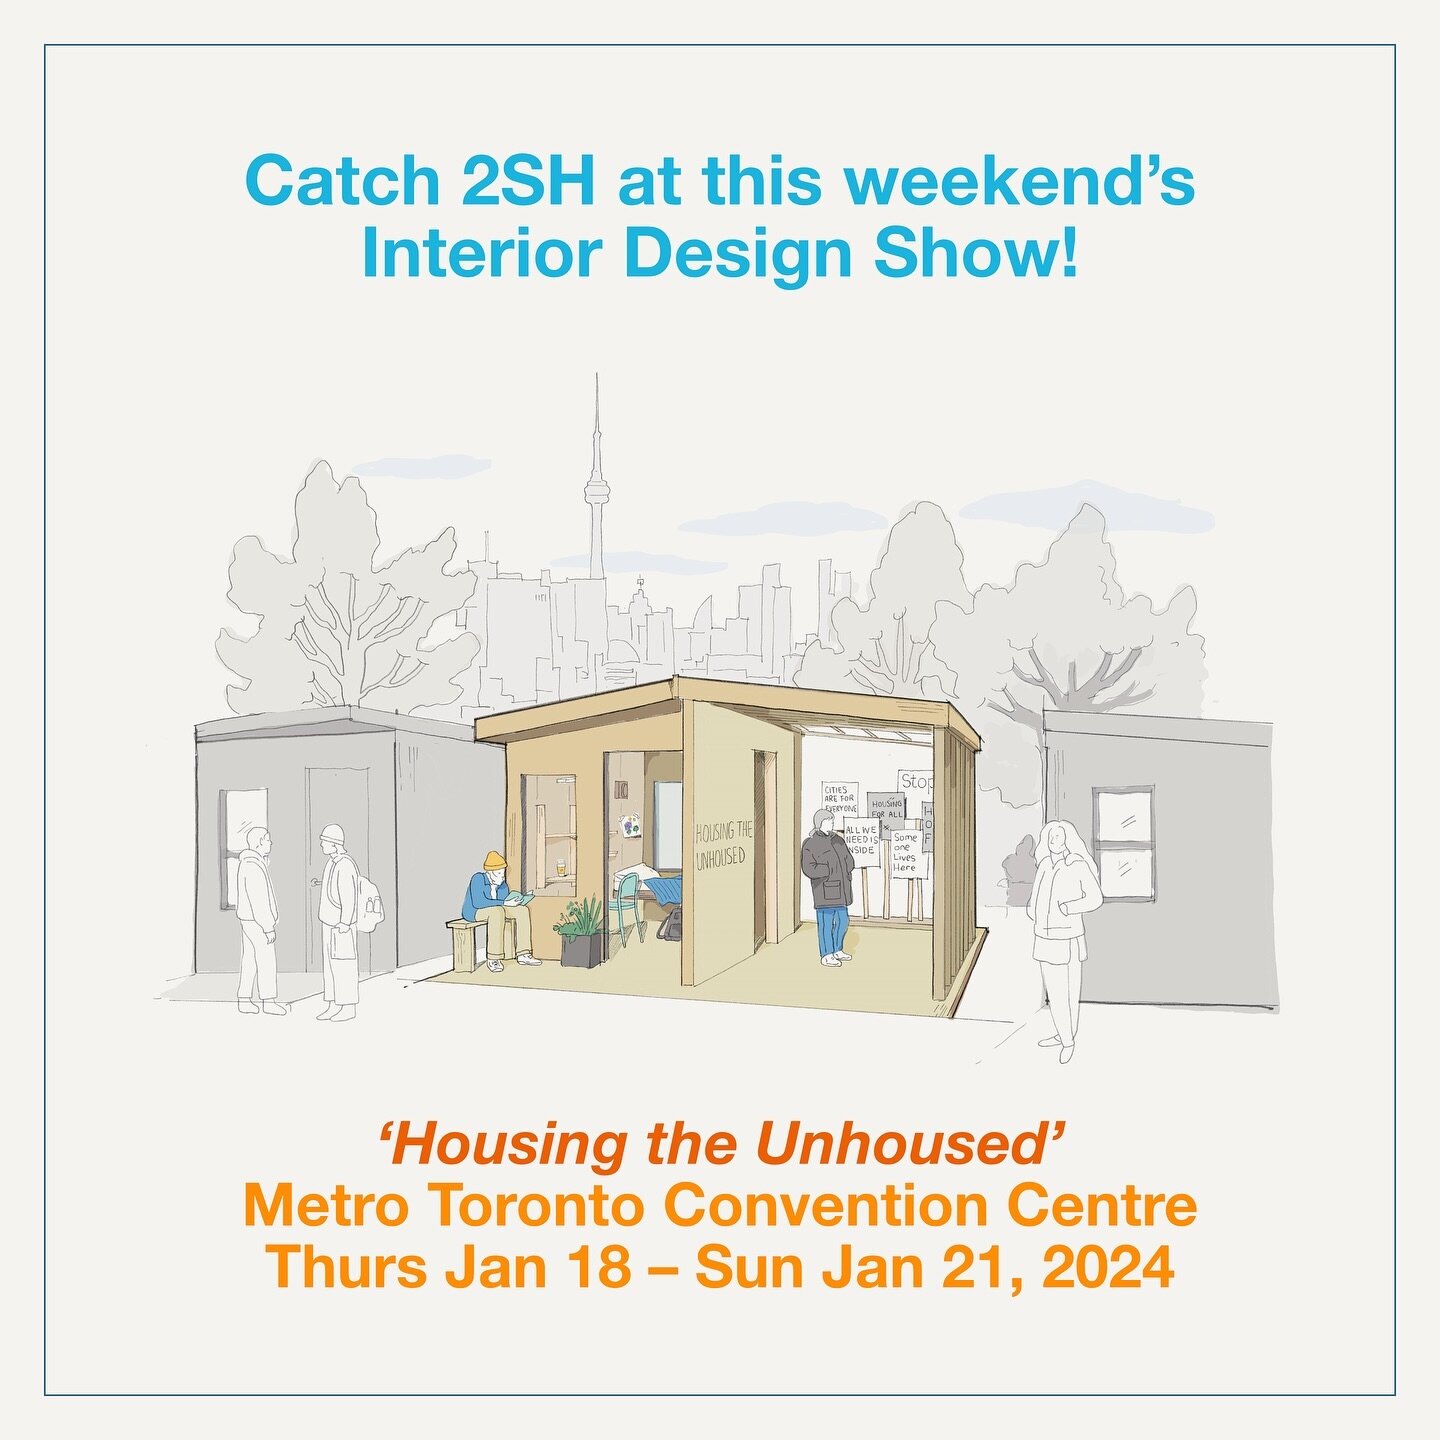 Torontoooo - come see a first glimpse of our cabin at @idstoronto this weekend! A collaboration with @svn.ap and @cabn.co; our team will be there too to chat about our project. Tickets are on the IDS website